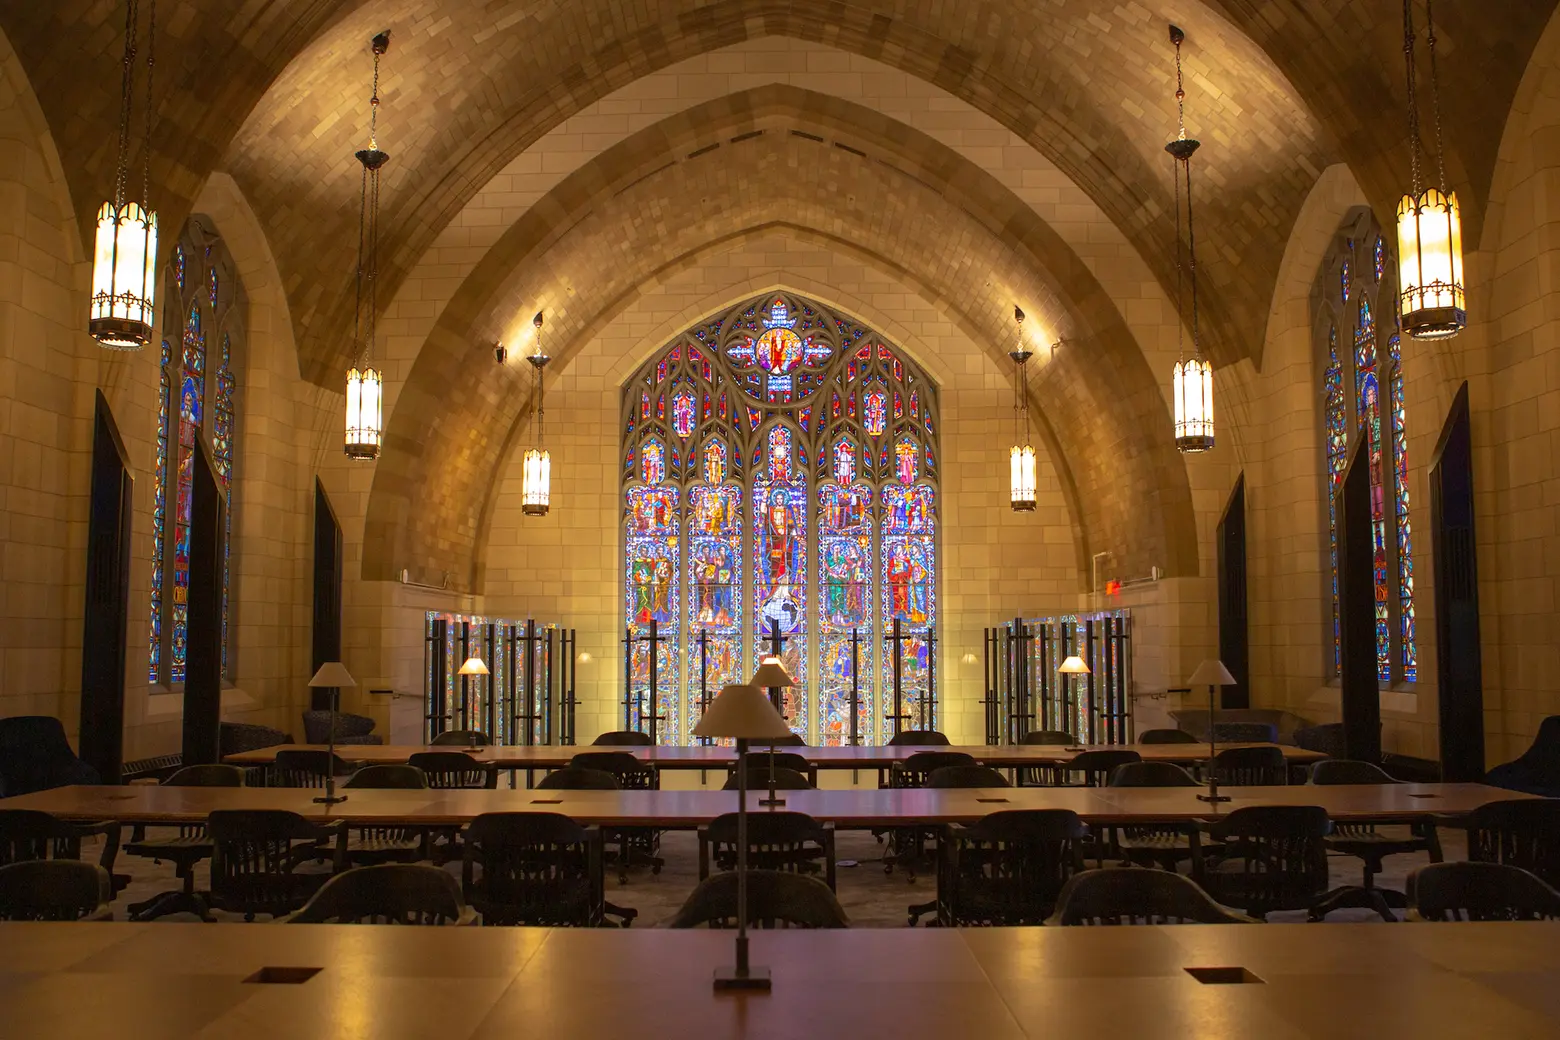 Audible opens new offices at a restored historic cathedral in Newark